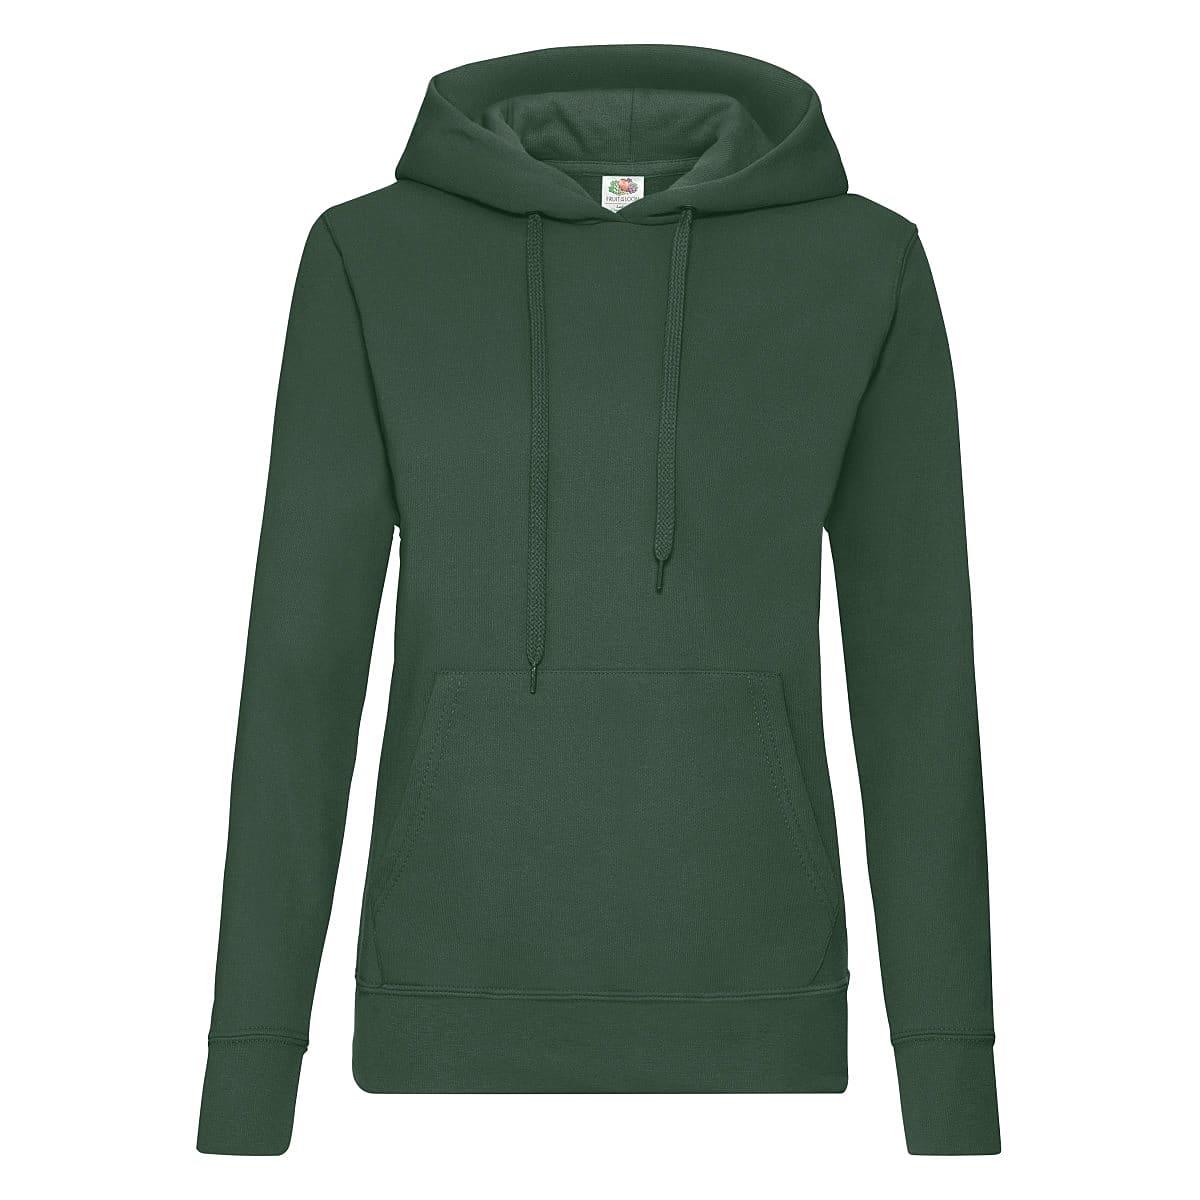 Fruit Of The Loom Lady-Fit Classic Hoodie in Bottle Green (Product Code: 62038)